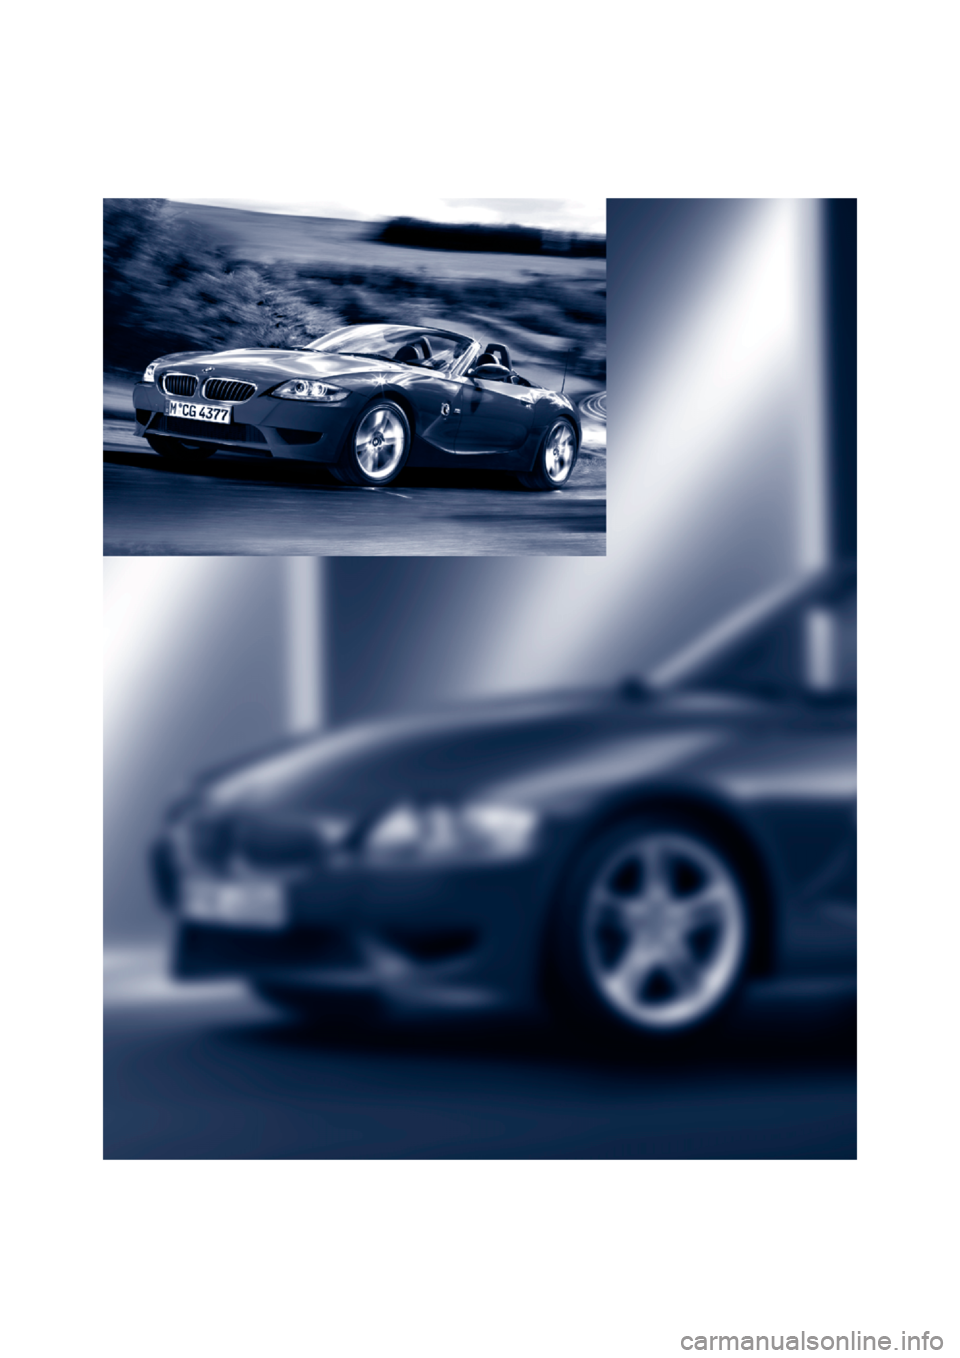 BMW Z4M COUPE 2007 E86 Owners Manual ba5.book  Seite 6  Mittwoch, 28. Februar 2007  1:09 13 